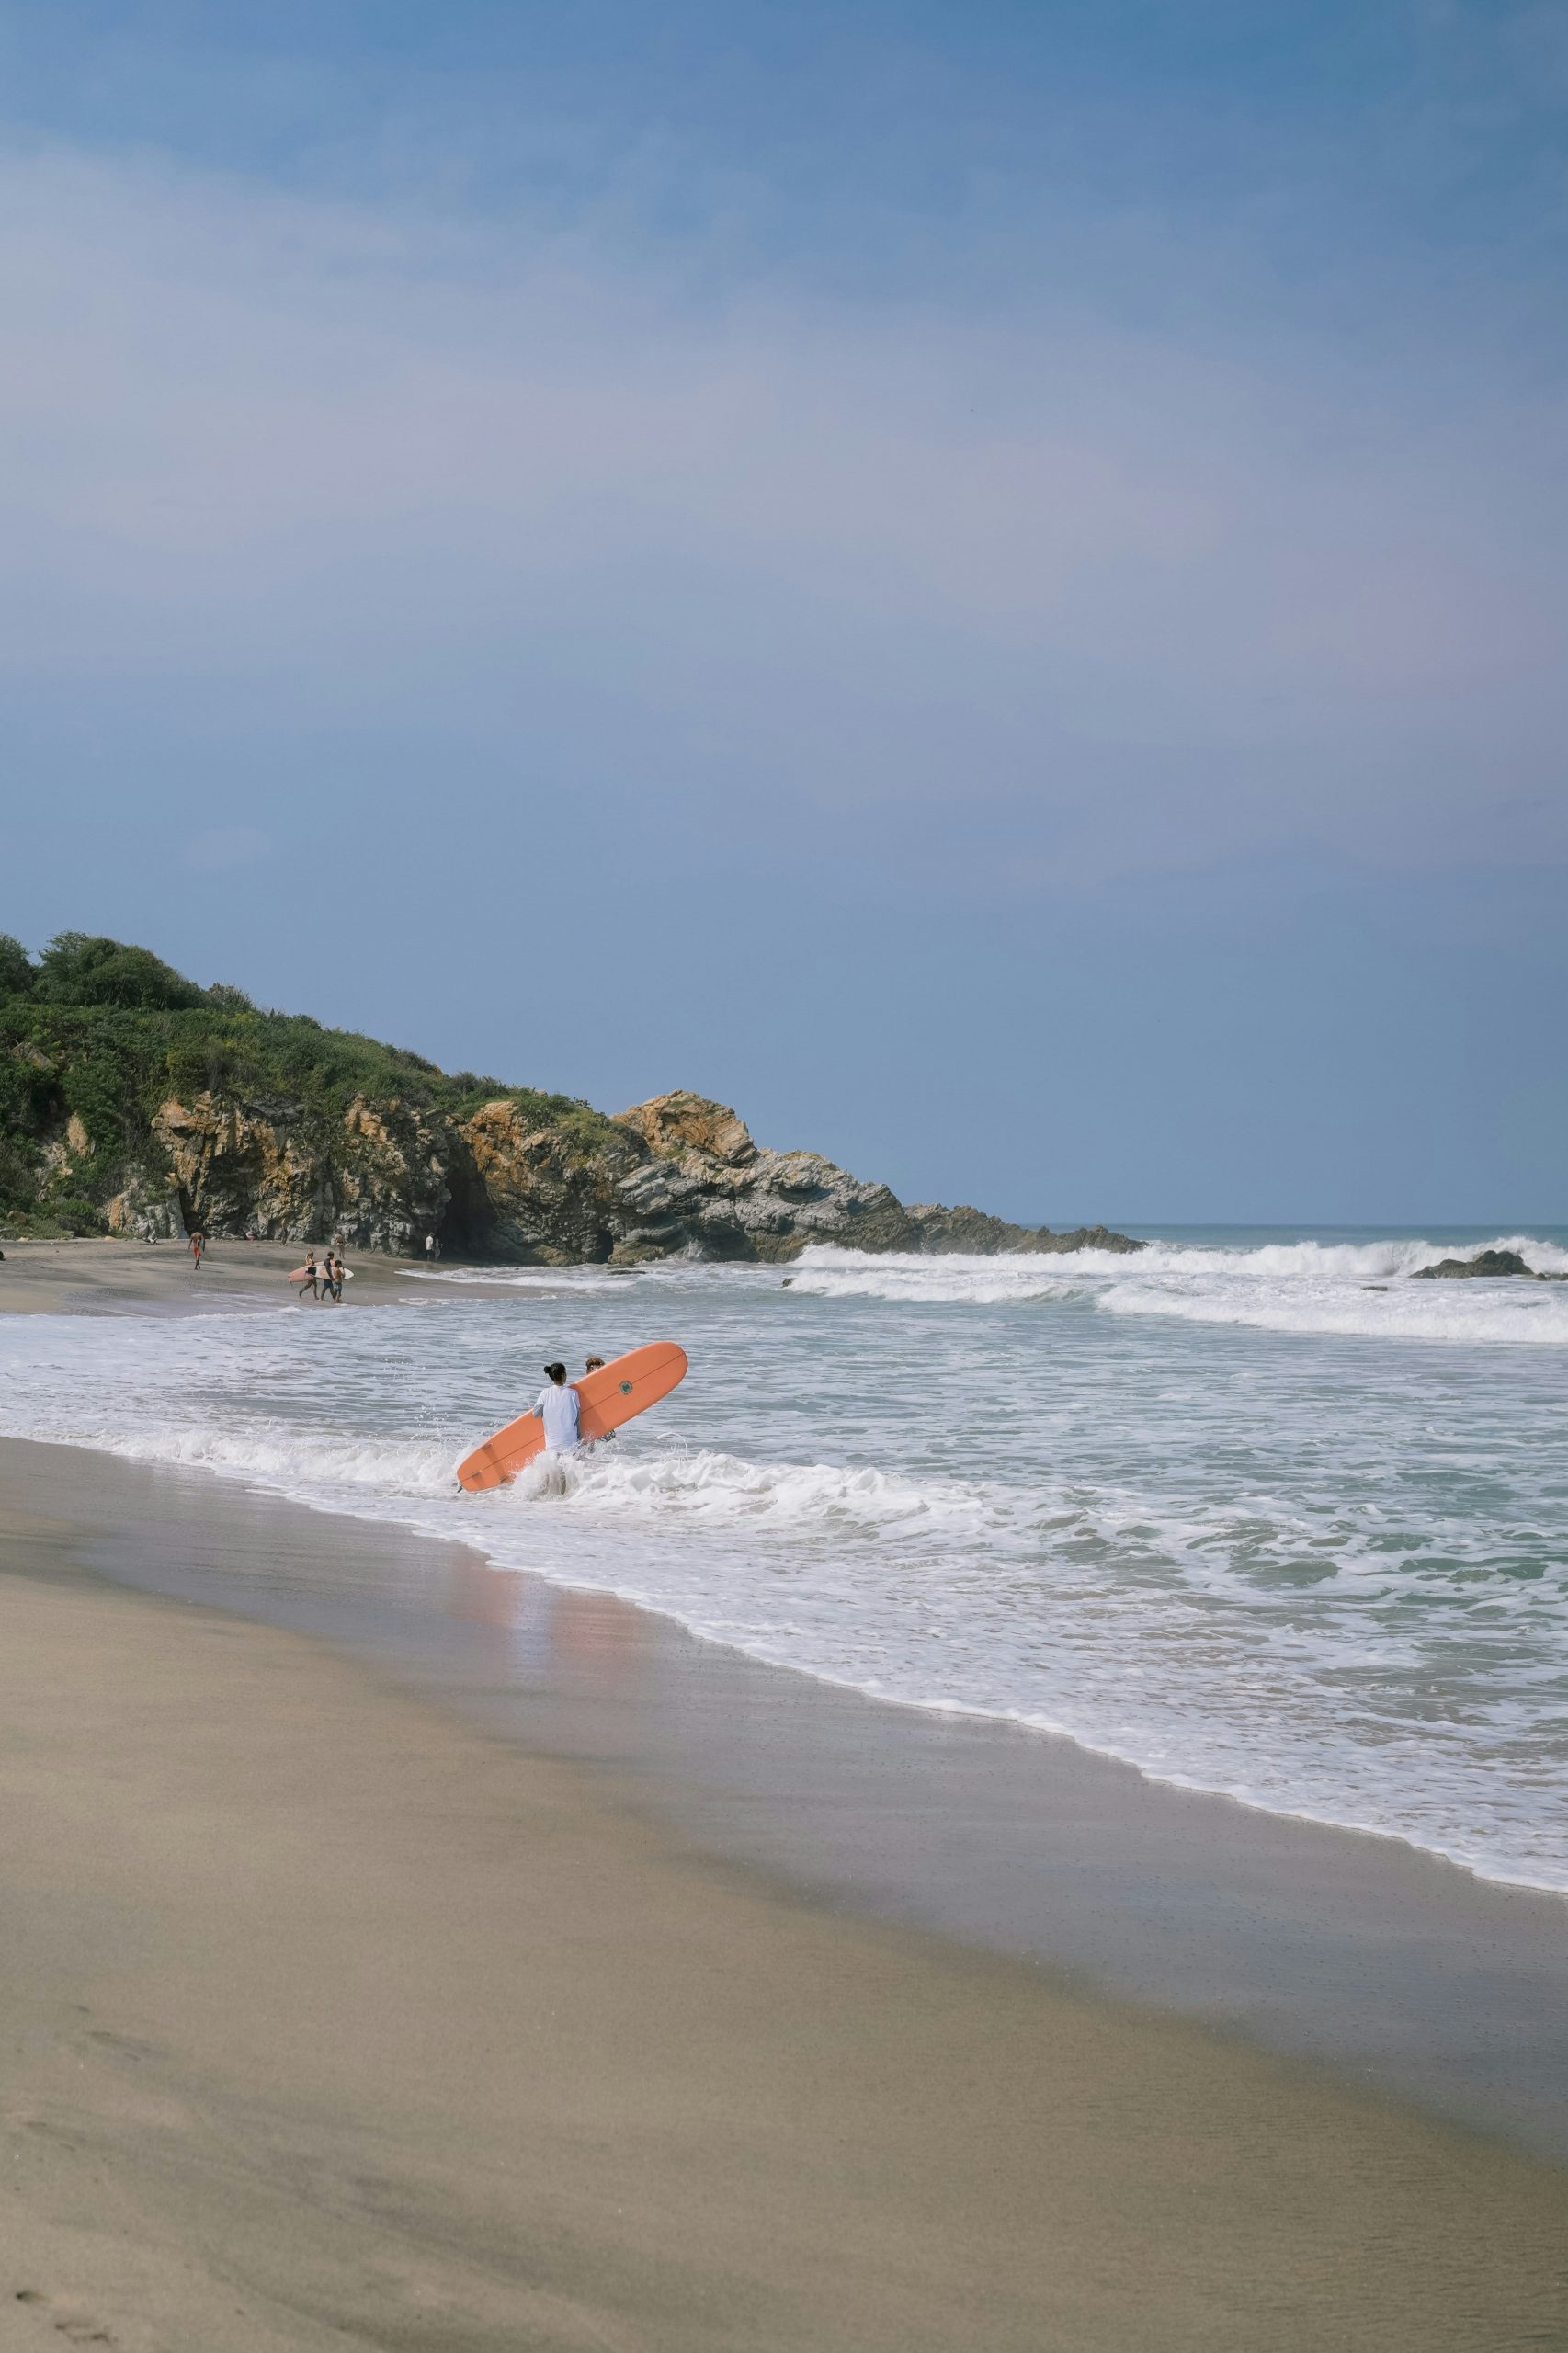 A Complete Guide to Surfing Puerto Escondido